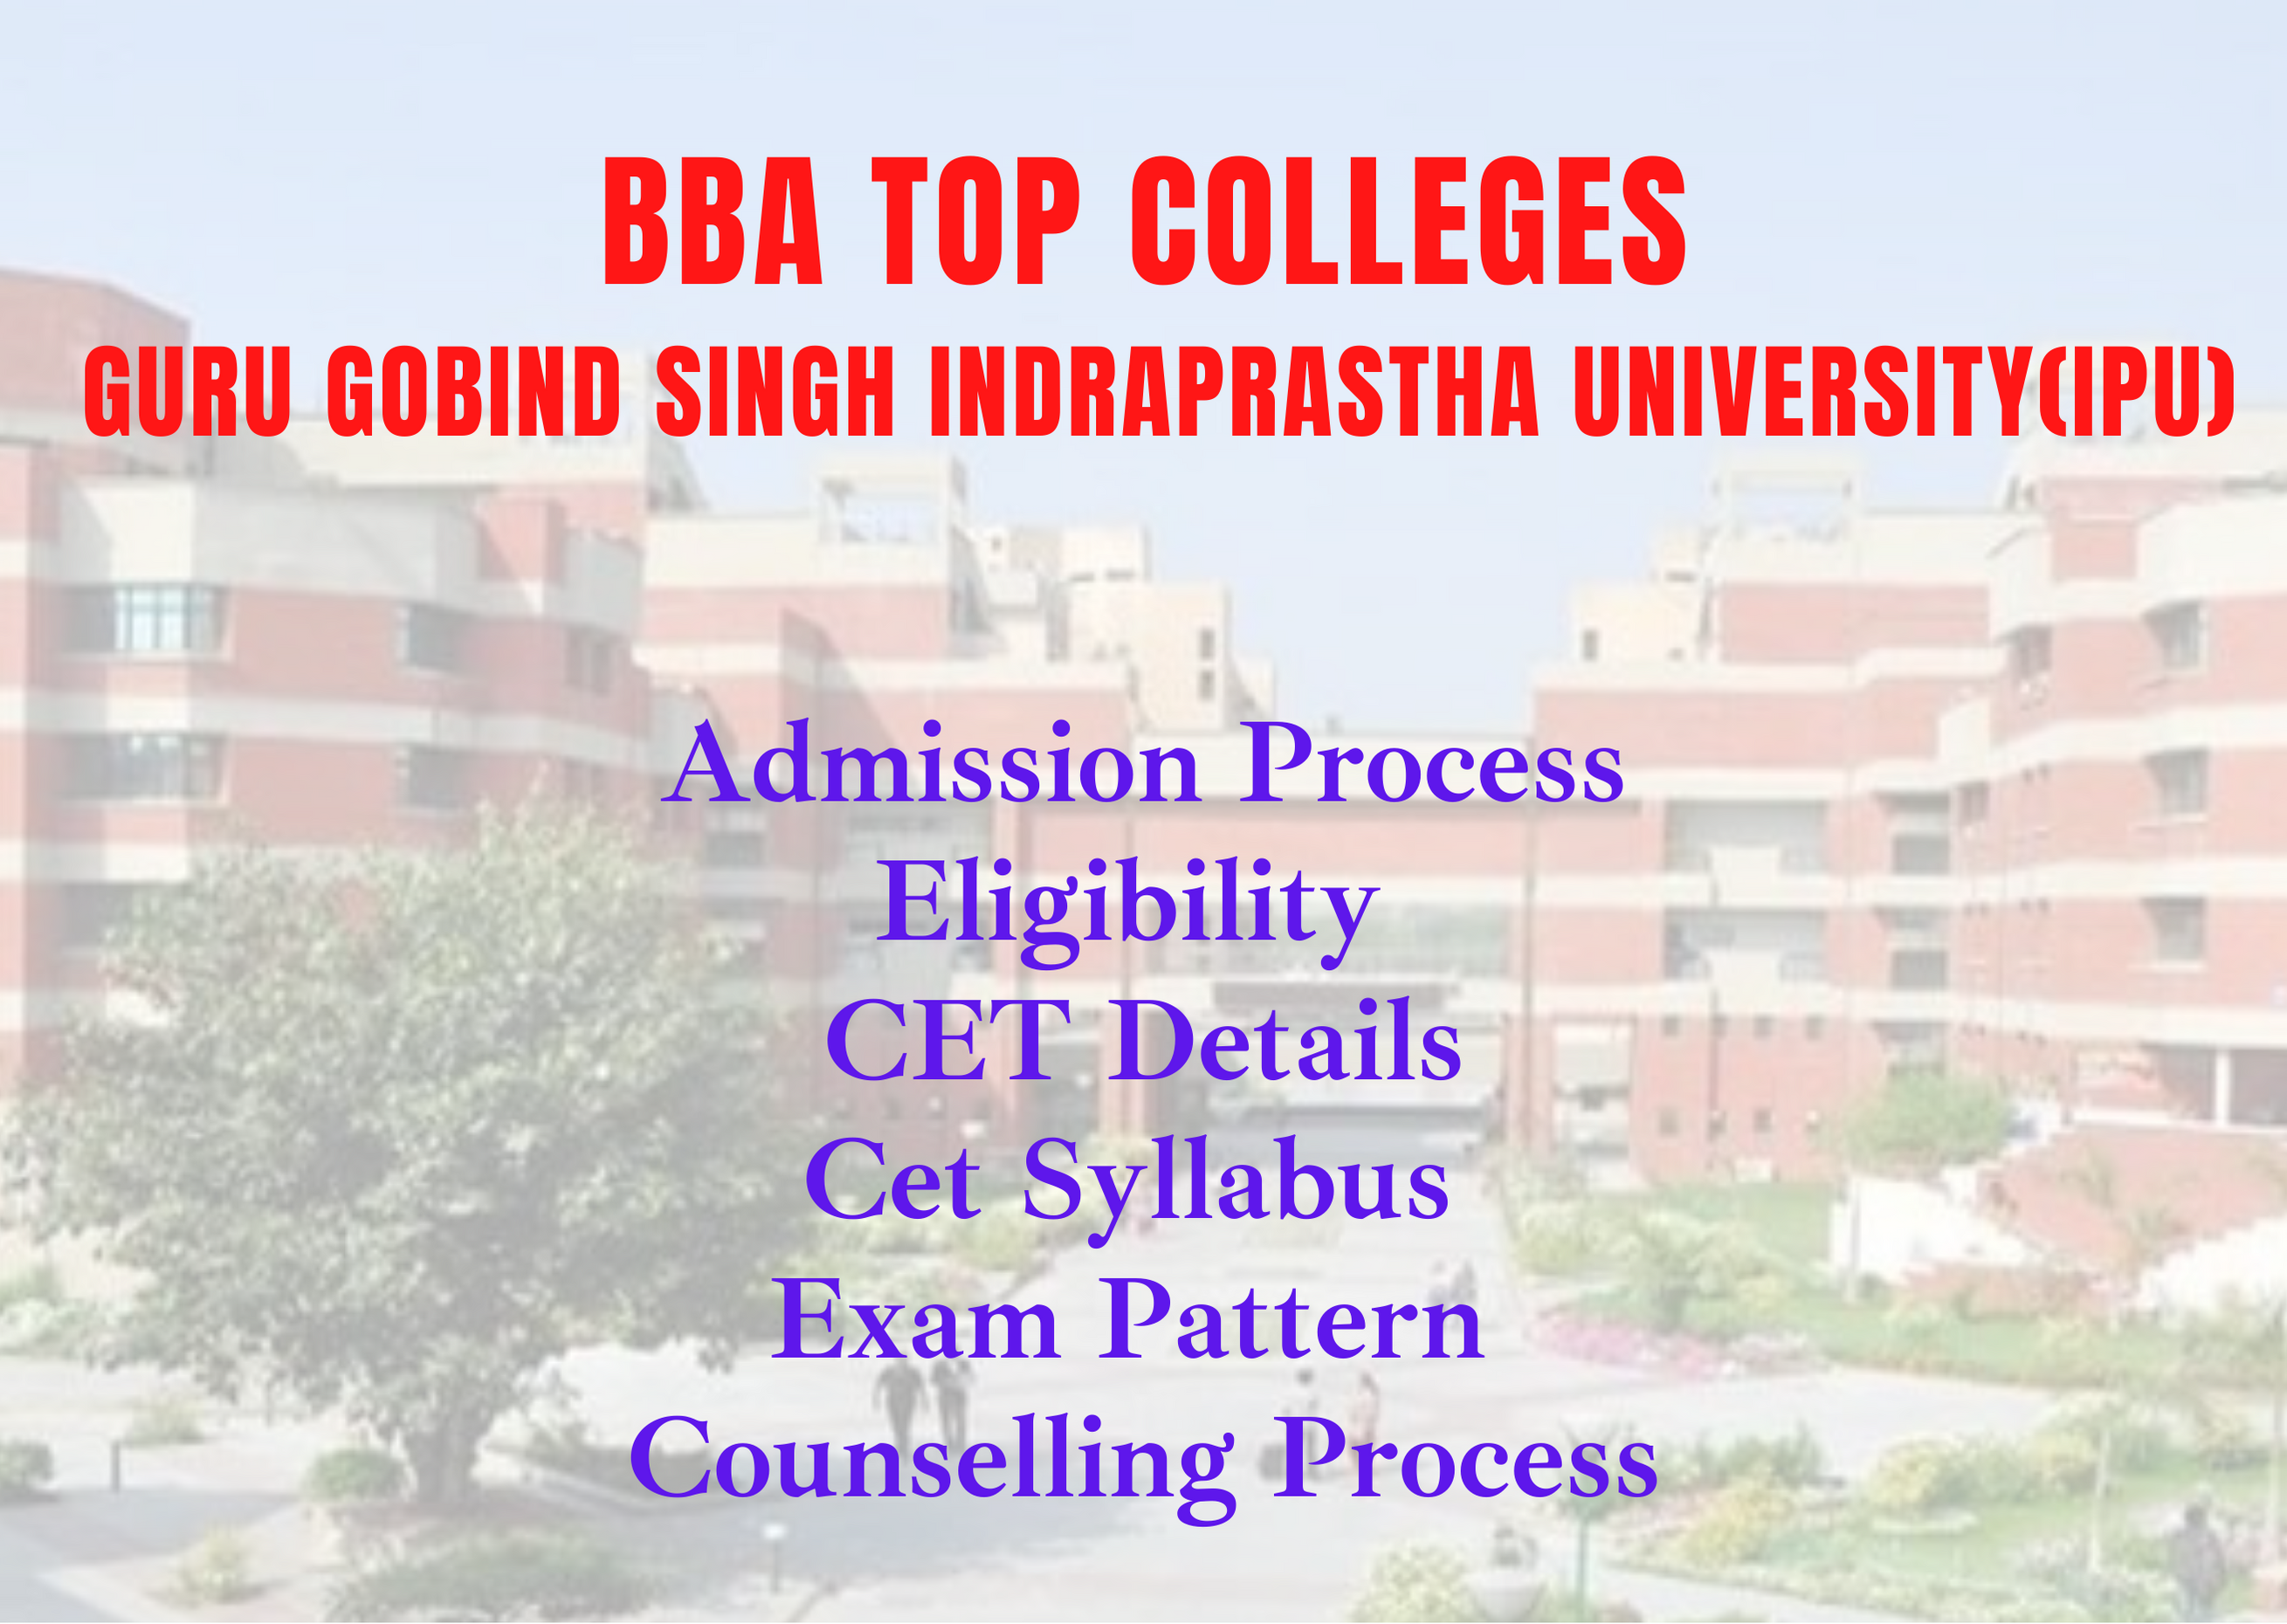 Ip Colleges For a And Admission Process For Ipu a Admission